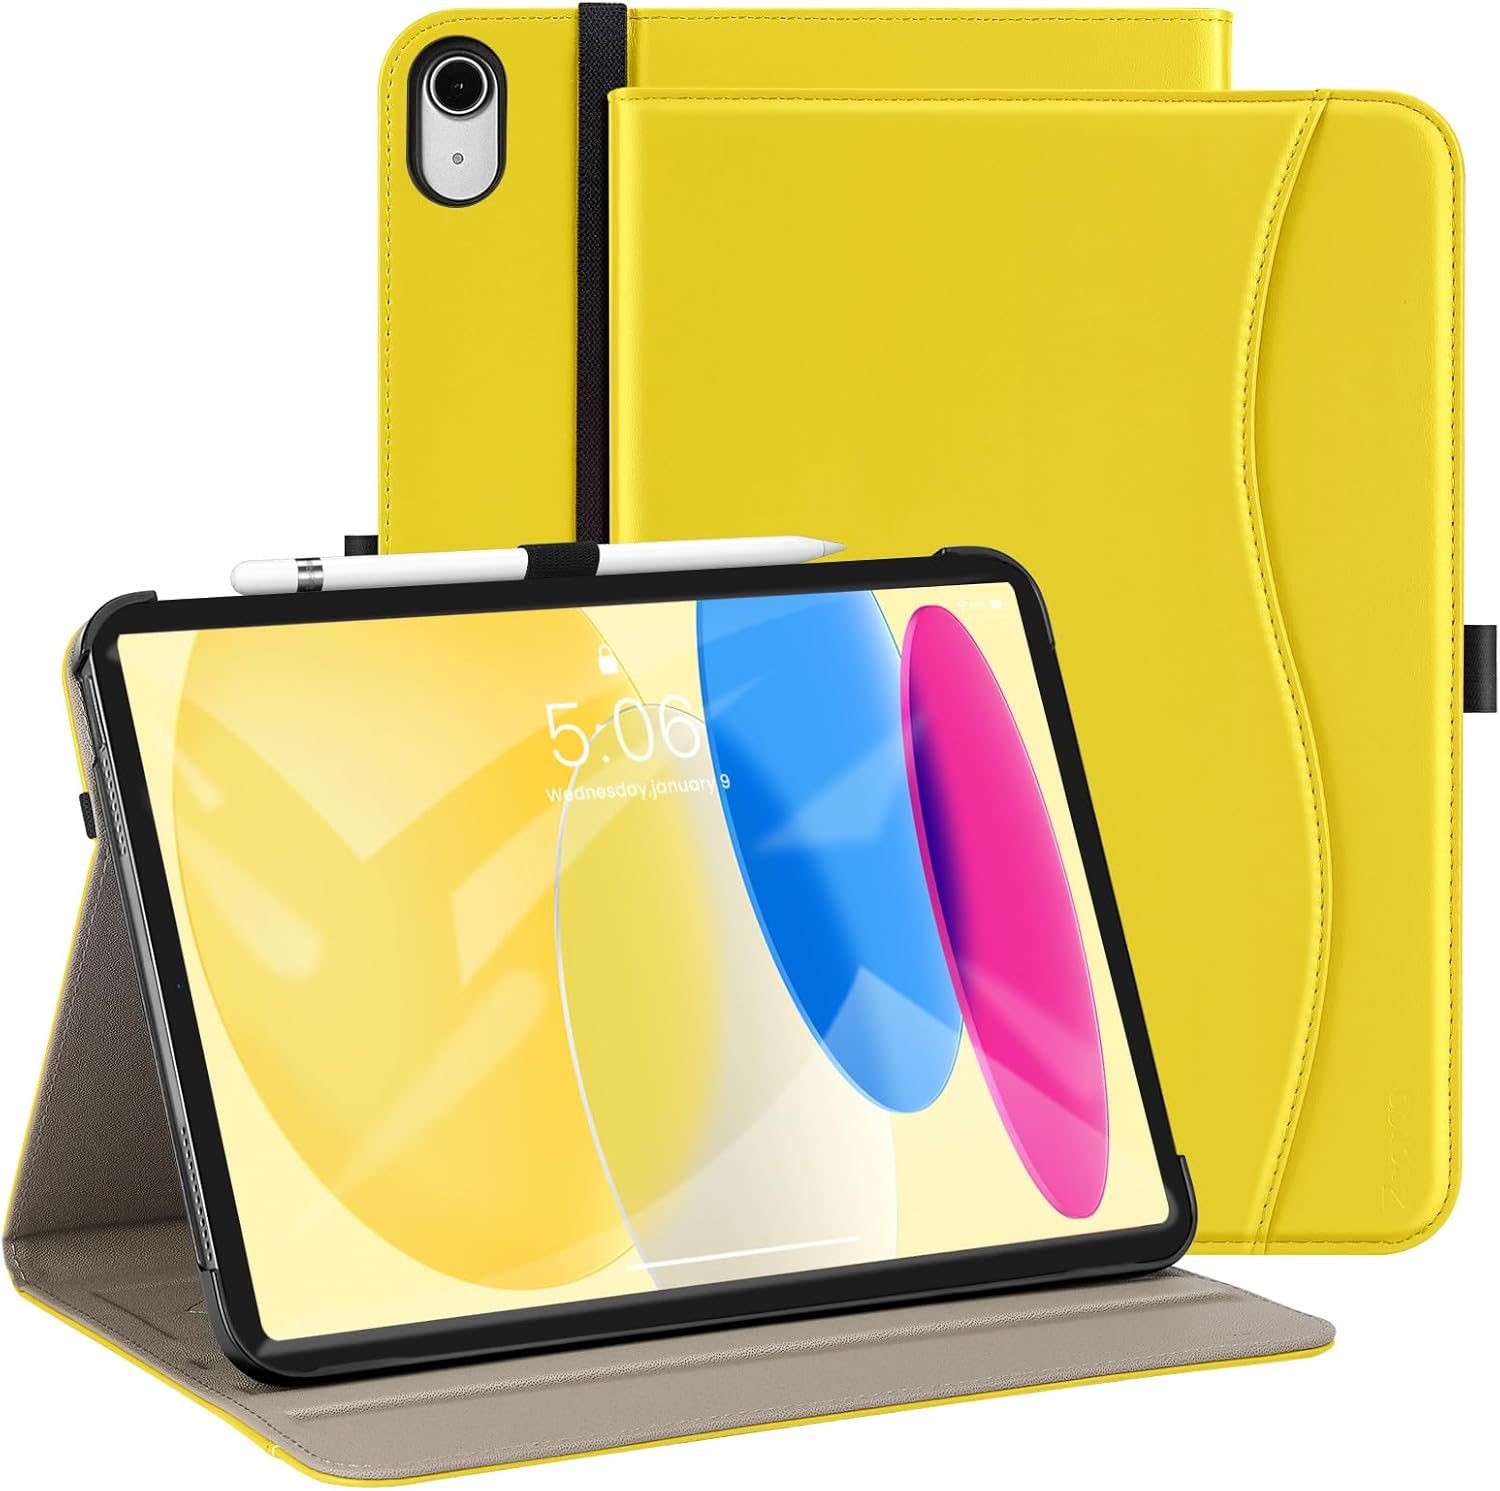 ZtotopCases Case for iPad 10th Generation,10.9 Inch 2022 Model, Premium Leather Business Cover with Auto Wake/Sleep Function, Multi-Angle Viewing Stand Cover with Pocket & Pencil Holder, Yellow